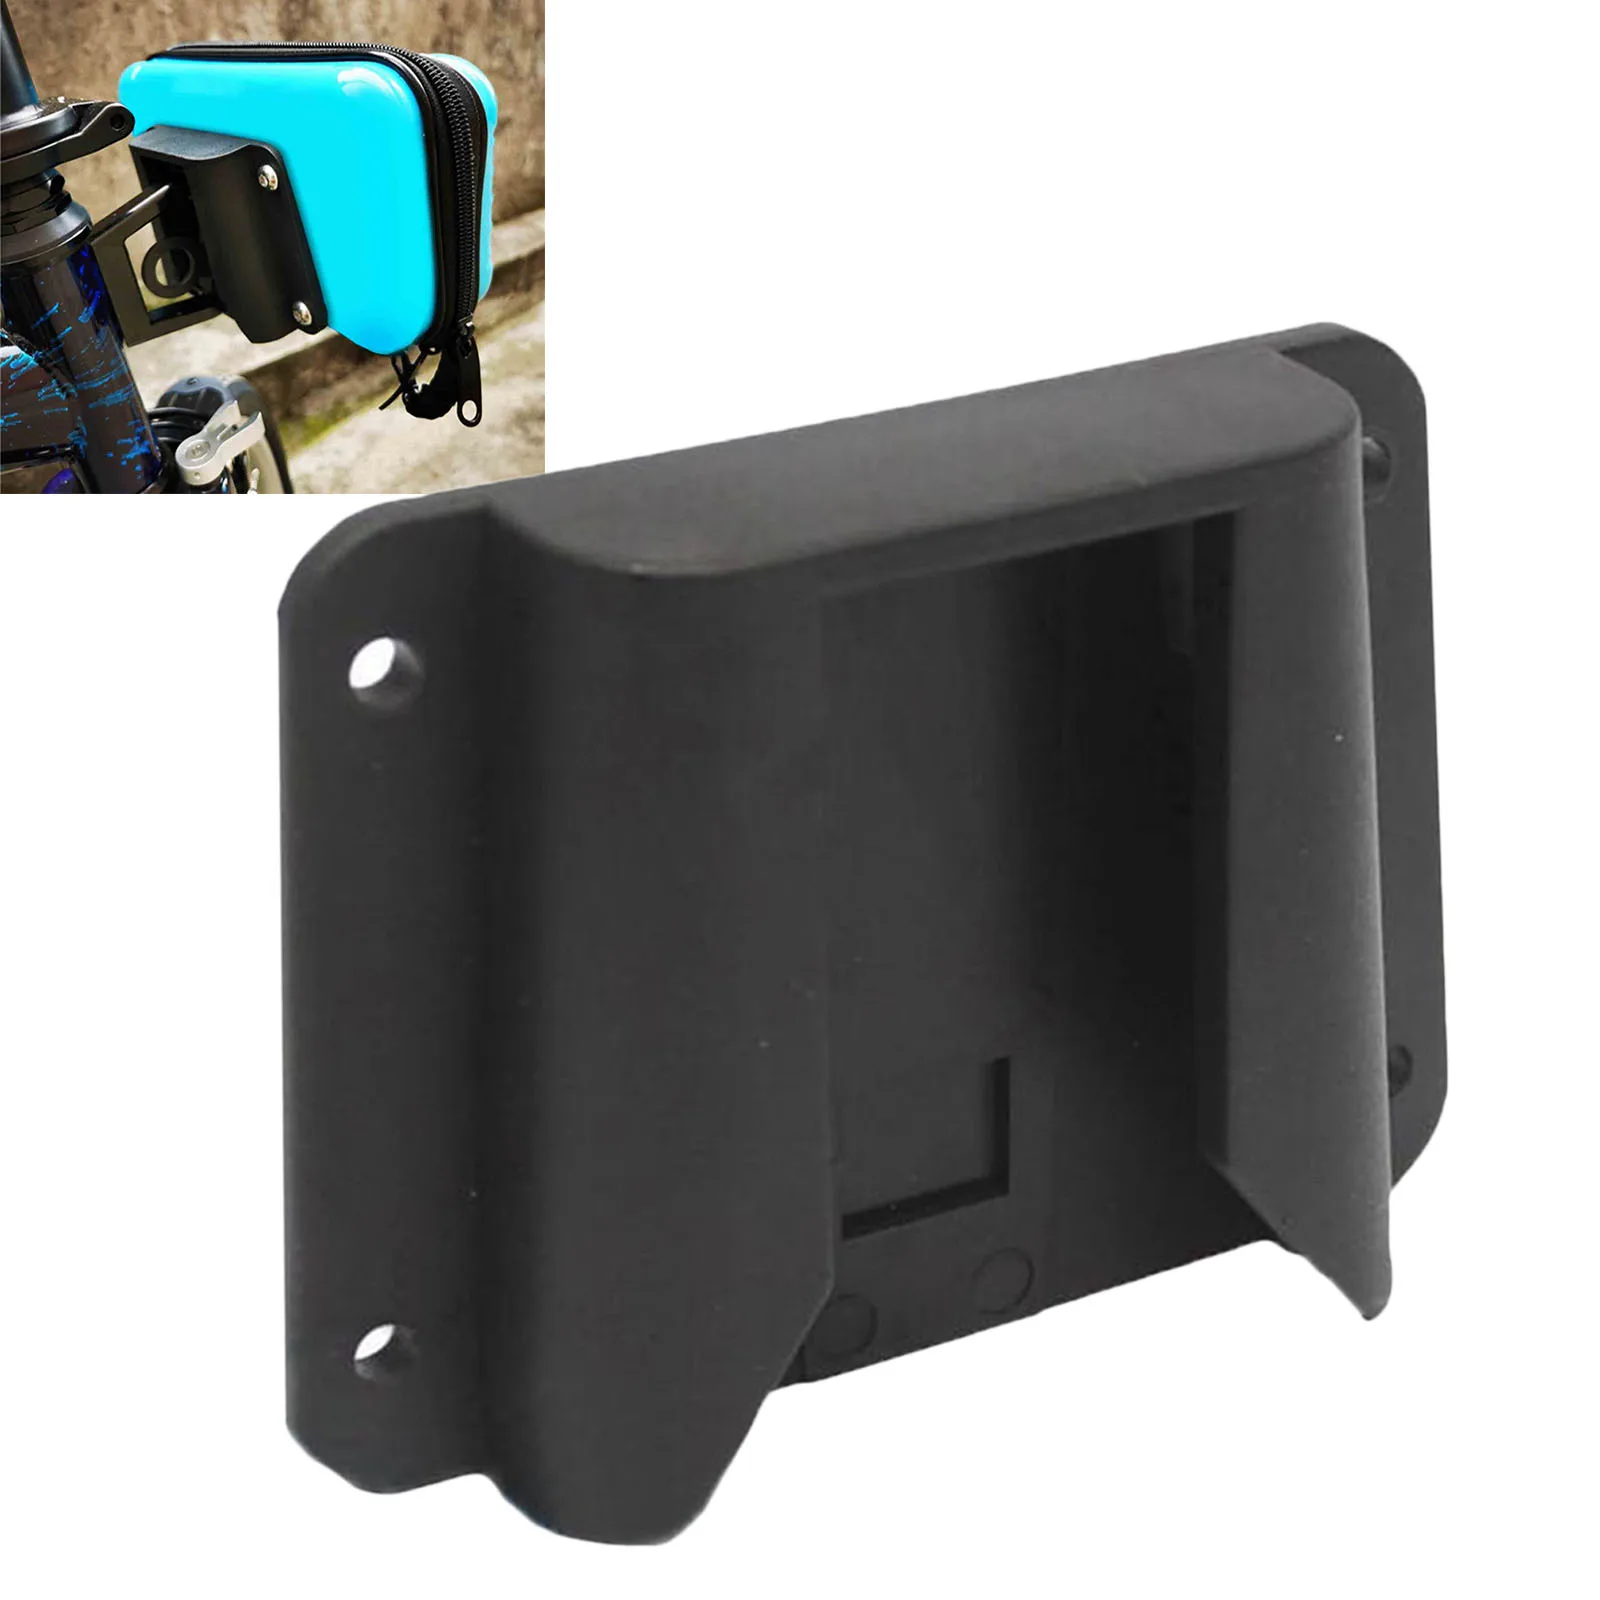 Bicycle pannier adapter holder for Brompton folding bicycle holder accessory